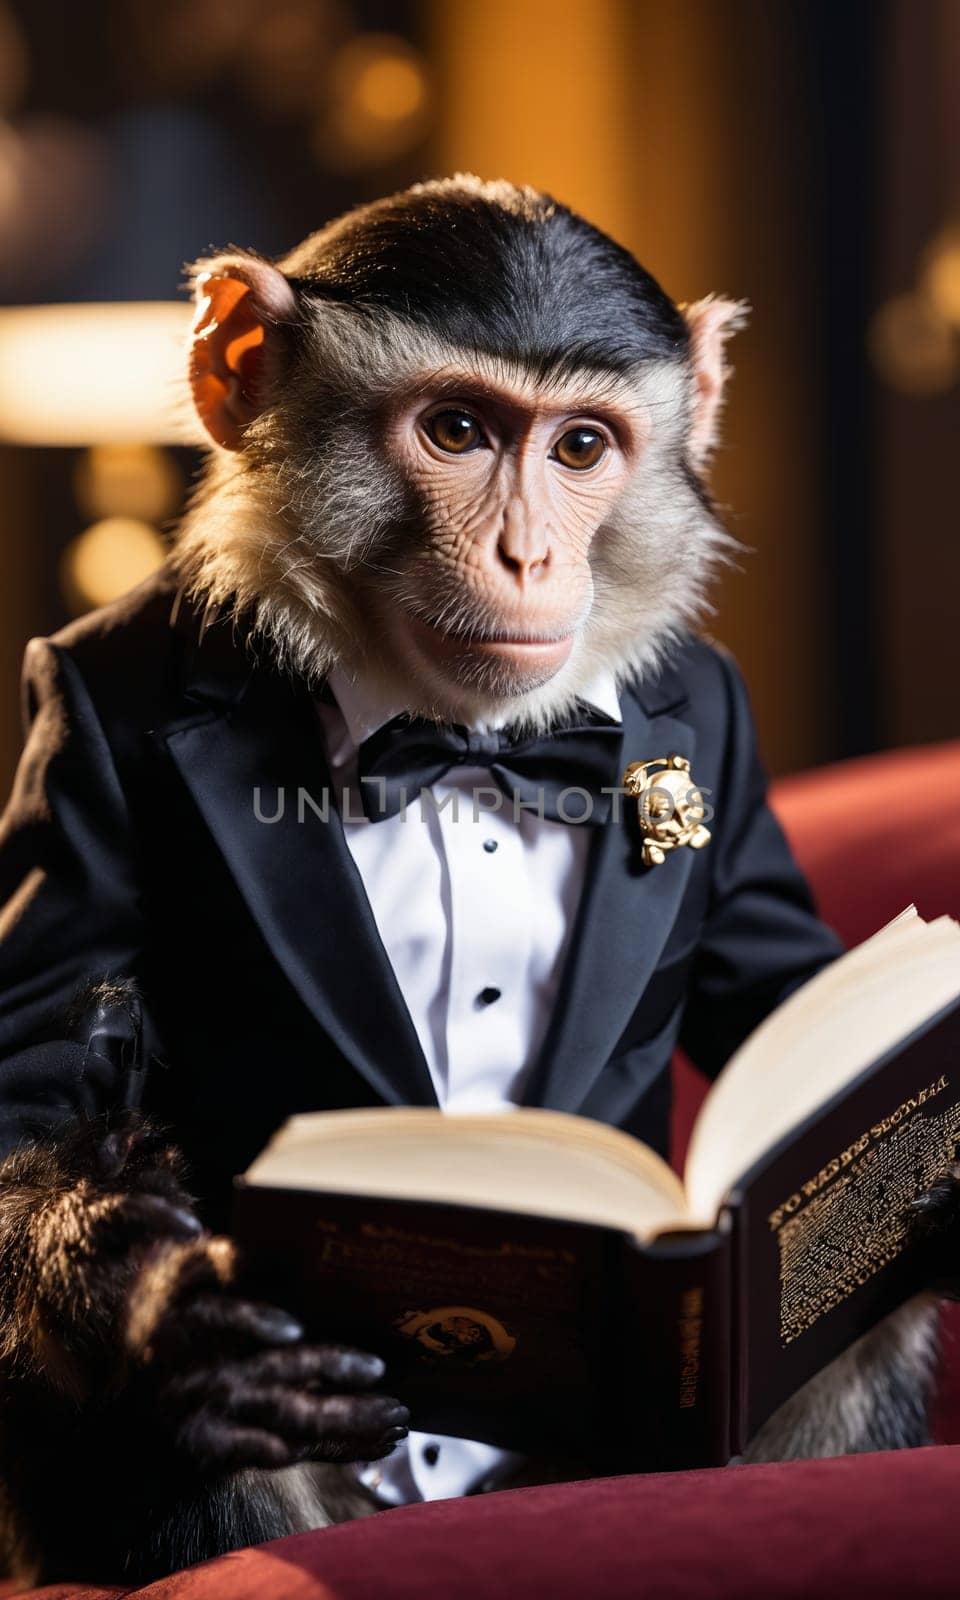 Monkey in a black suit and bow-tie reading a book.